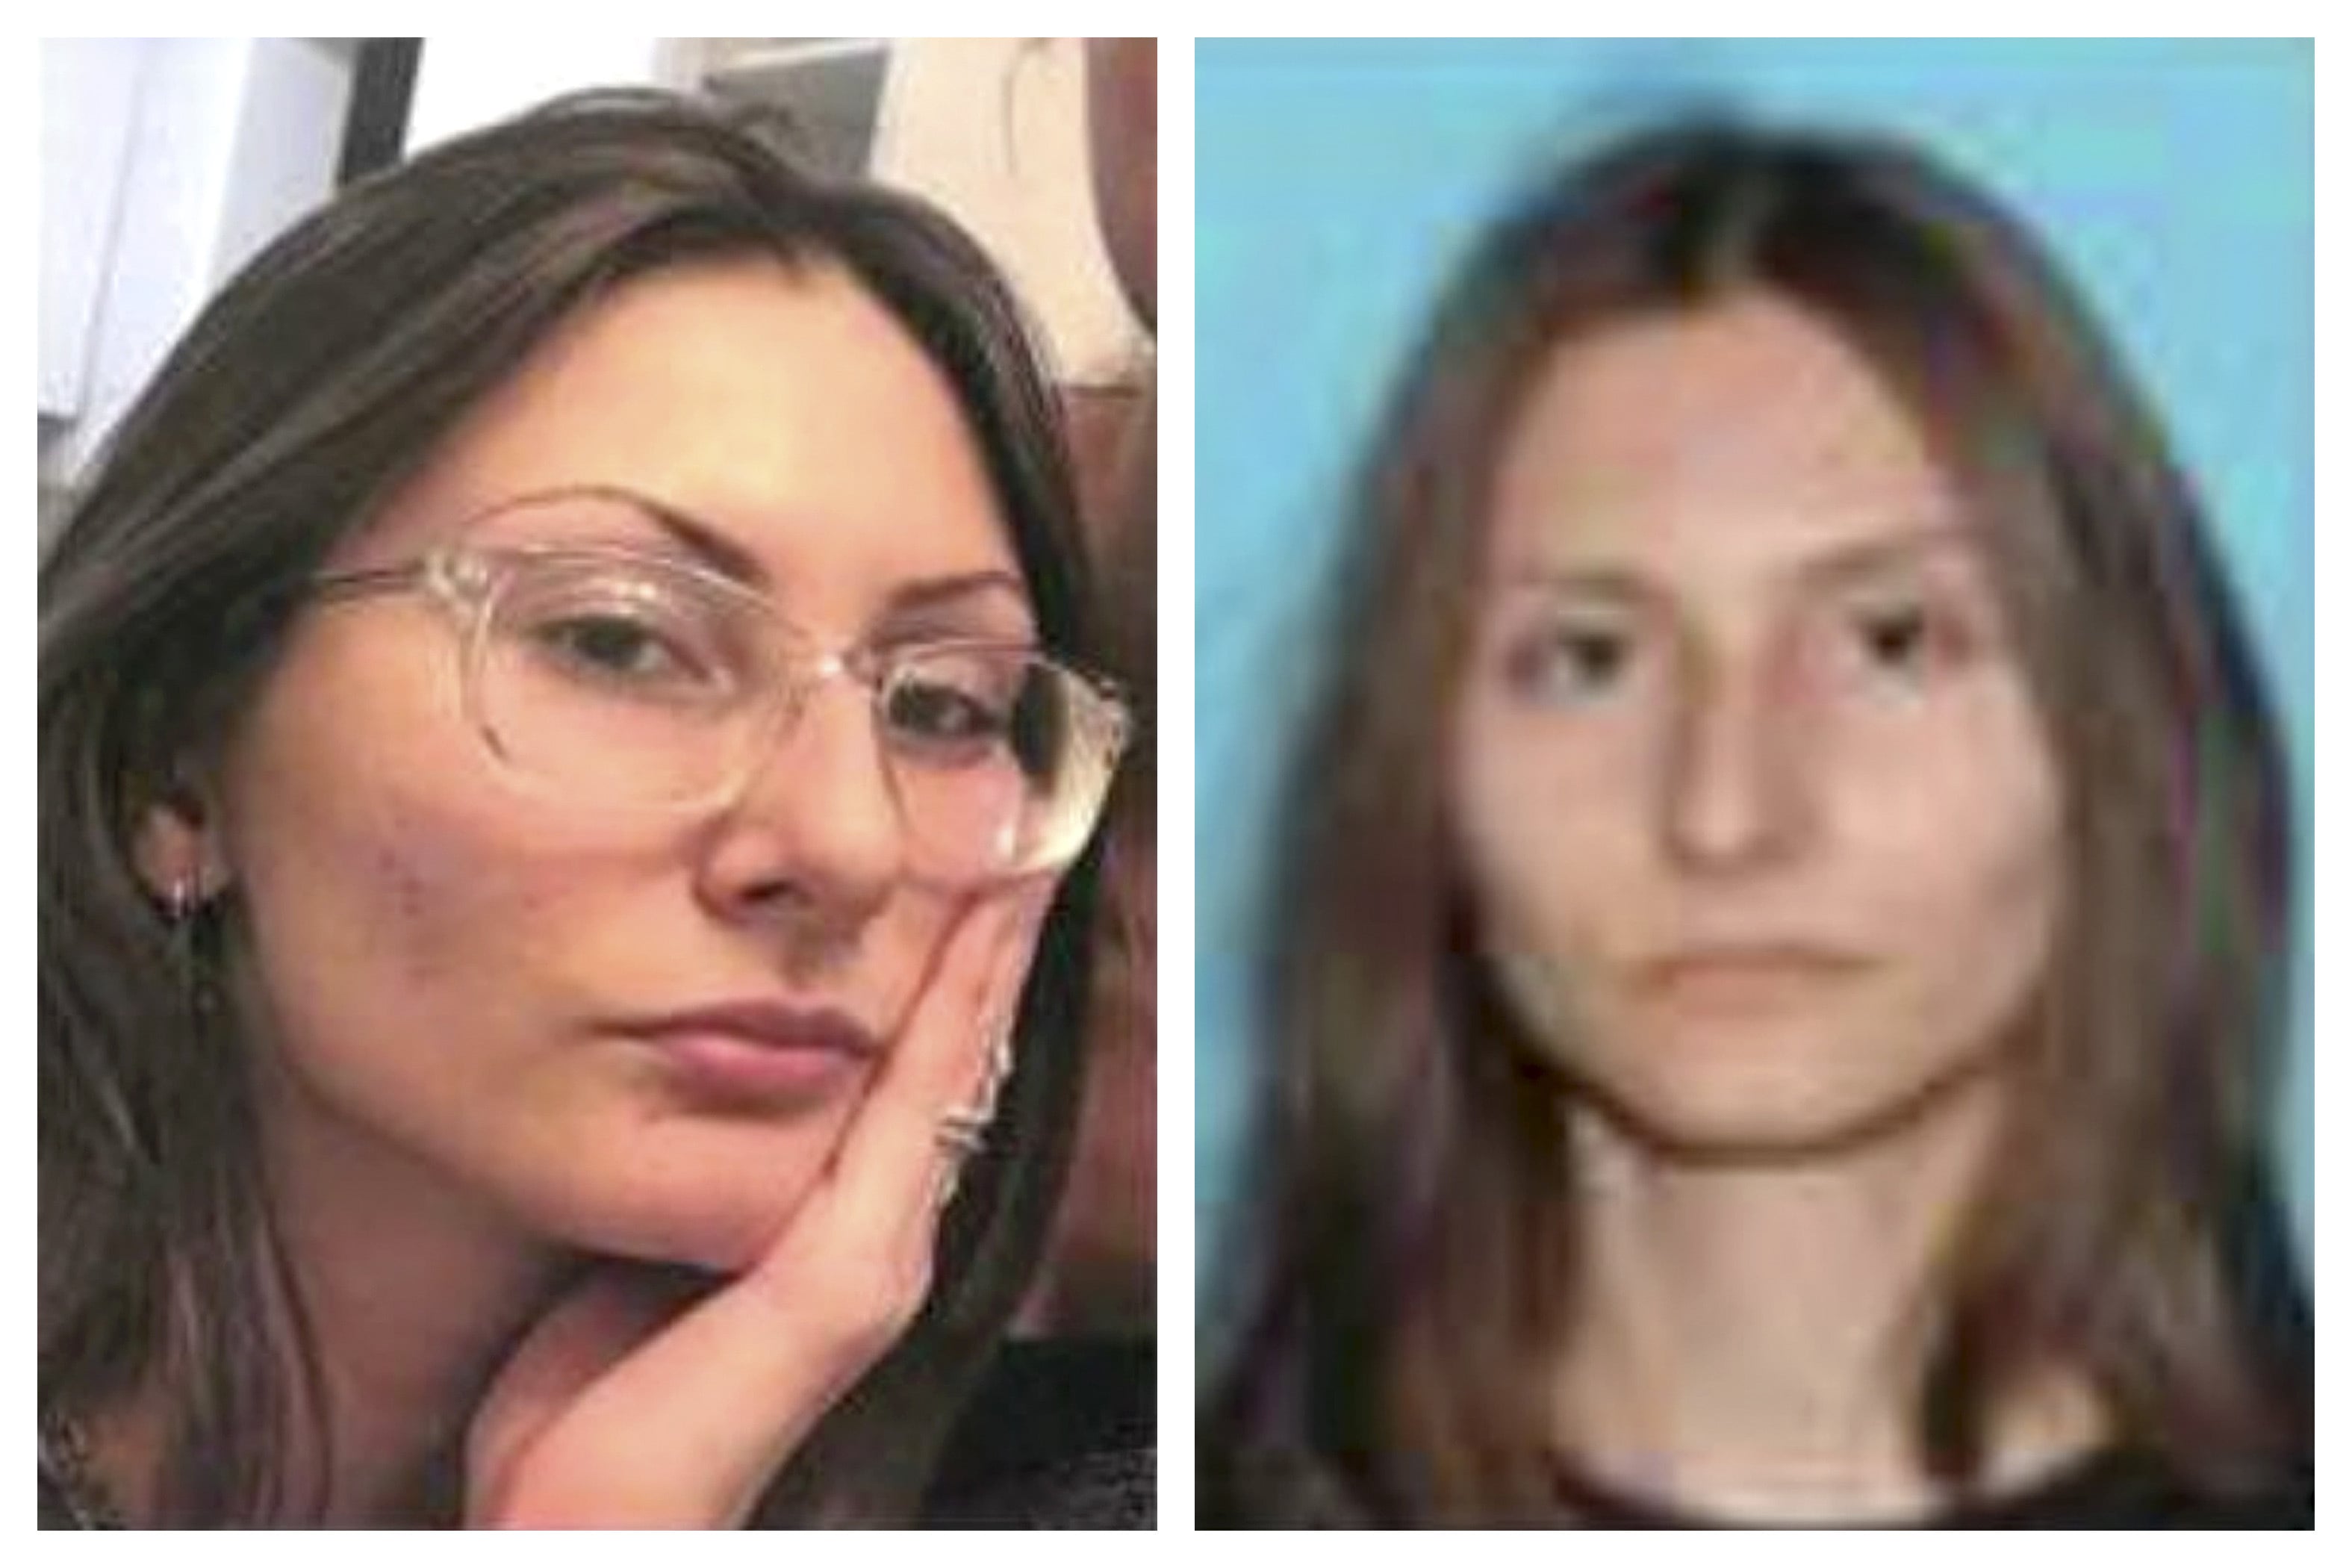 This combination of undated photos released by the Jefferson County, Colo., Sheriff's Office on Tuesday, April 16, 2019 shows Sol Pais. On Tuesday authorities said they are looking pais, suspected of making threats on Columbine High School, just days before the 20th anniversary of a mass shooting that killed 13 people.